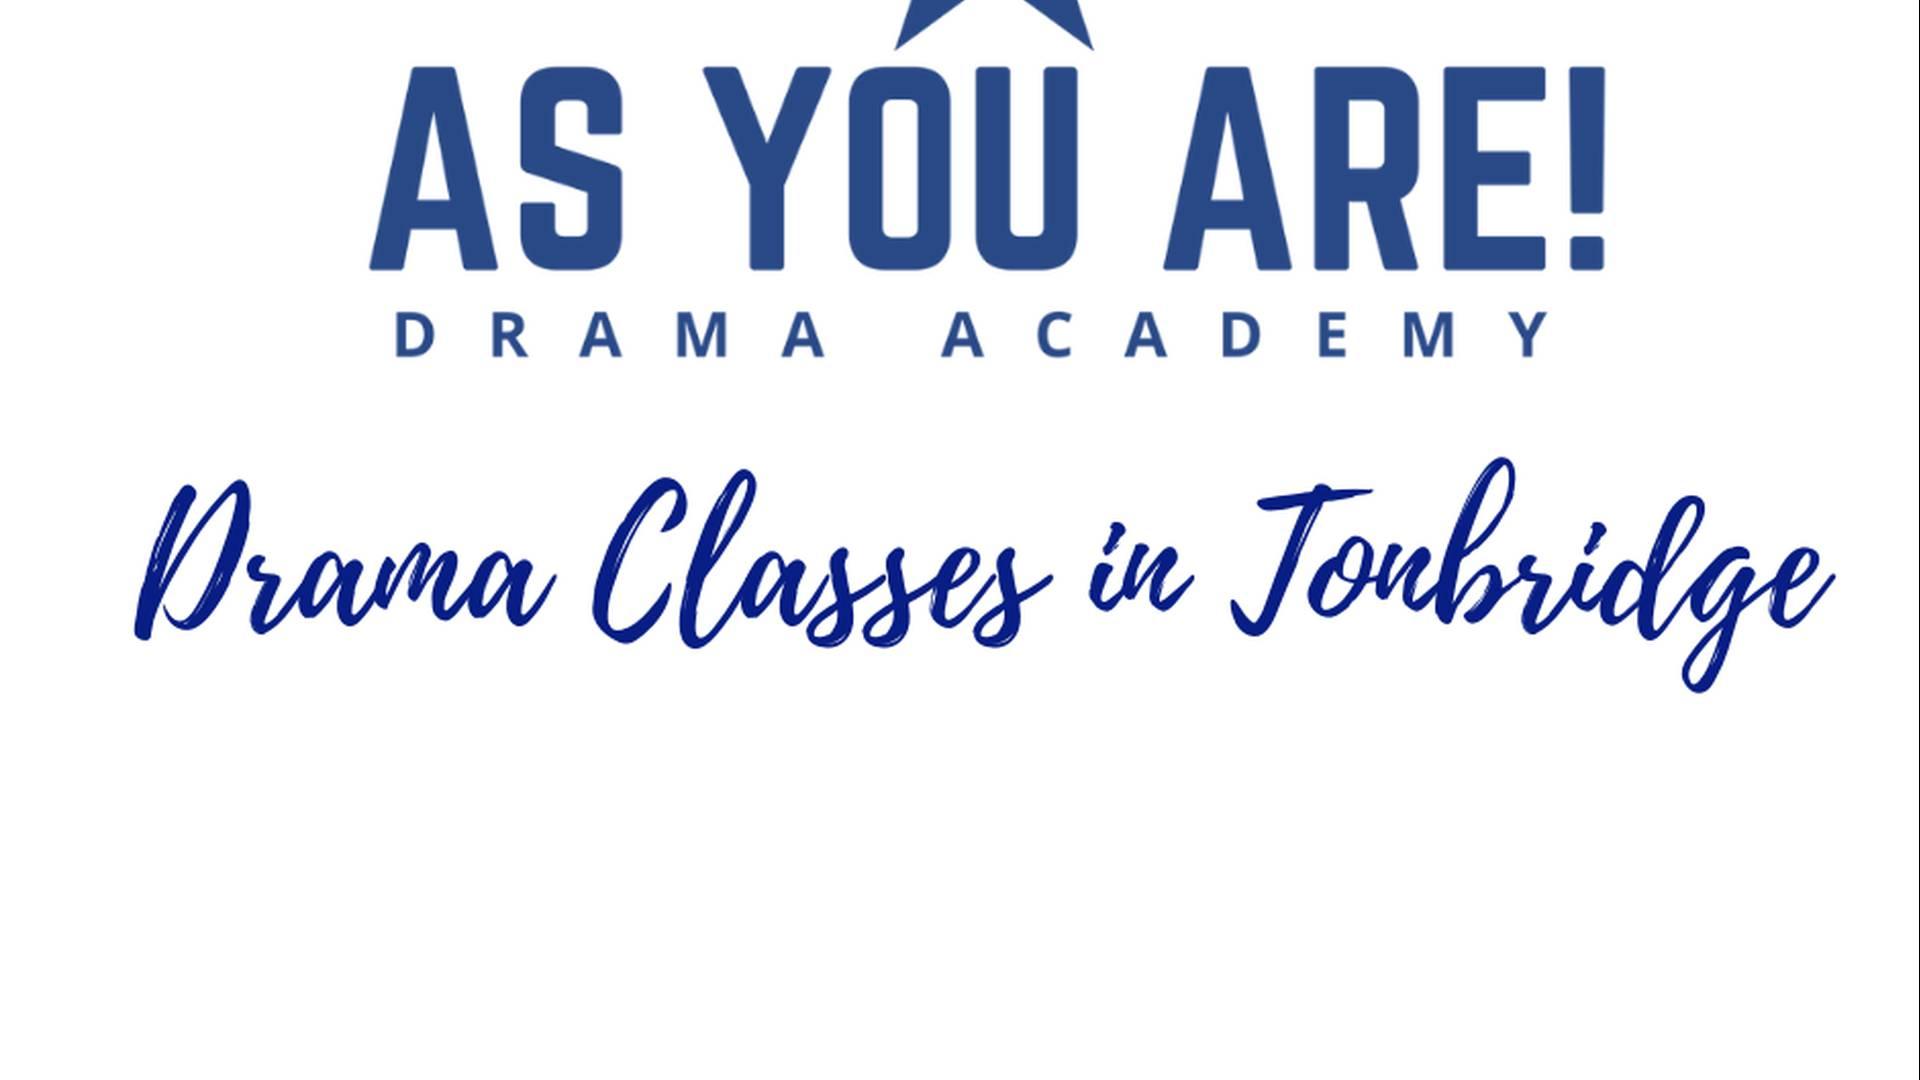 As You Are! Productions & Drama Academy photo